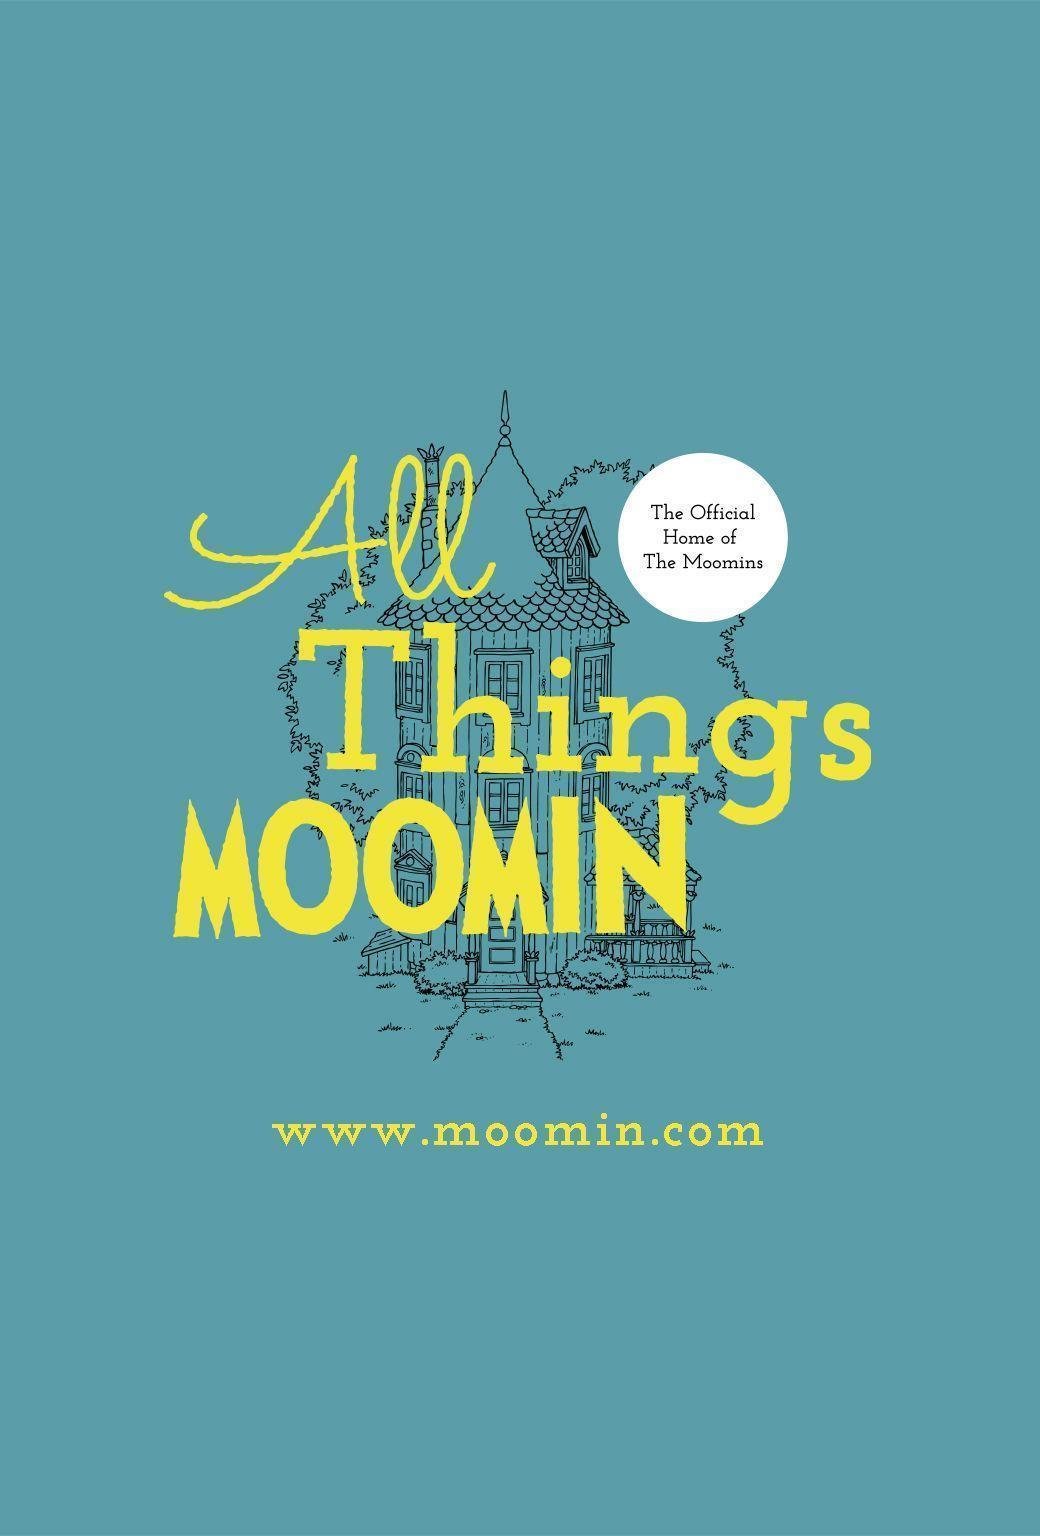 Introducing All Things Moomin's first official wallpaper!